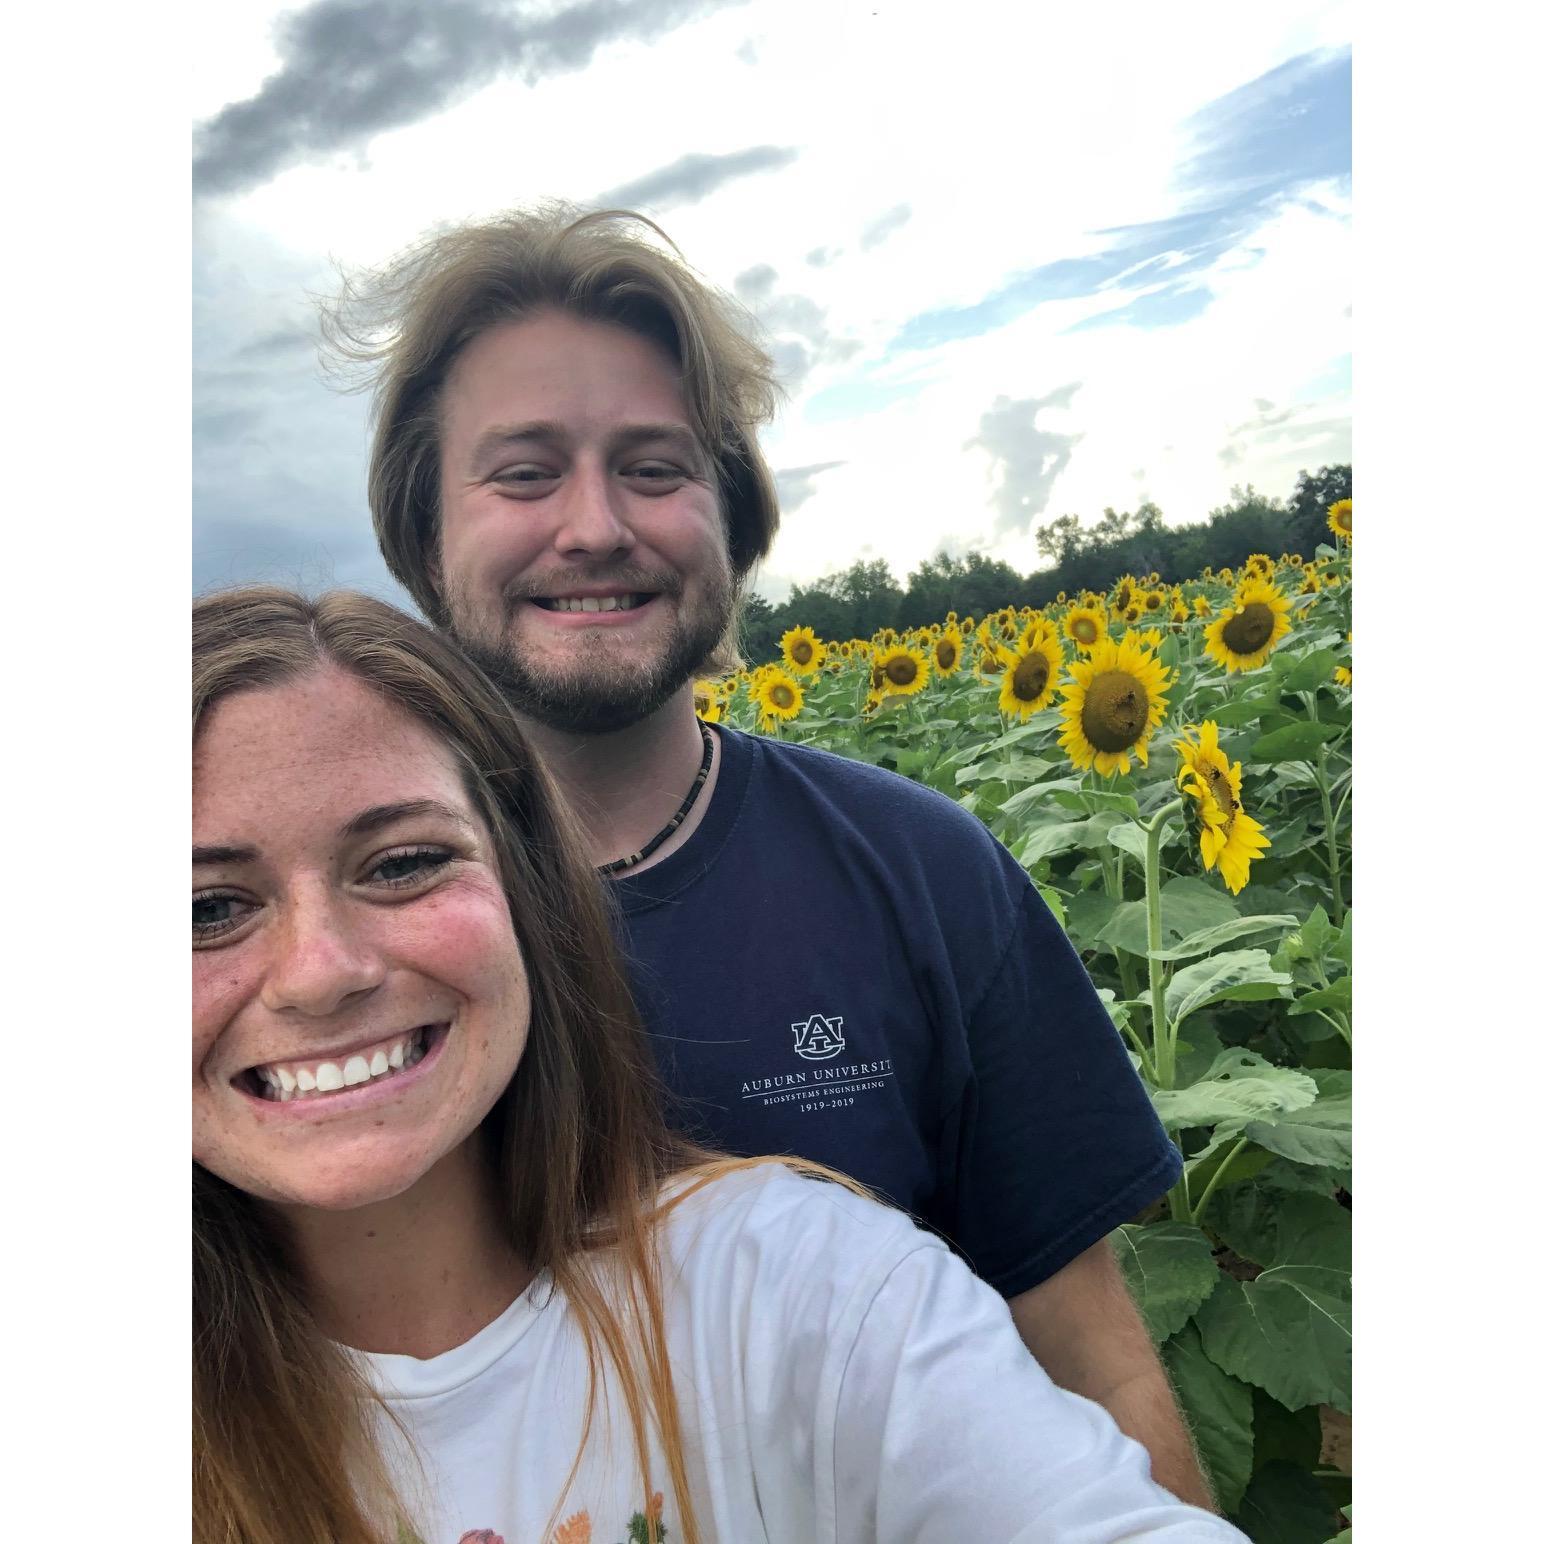 This is the first picture we ever took together! Tel took me on a date to a sunflower field!